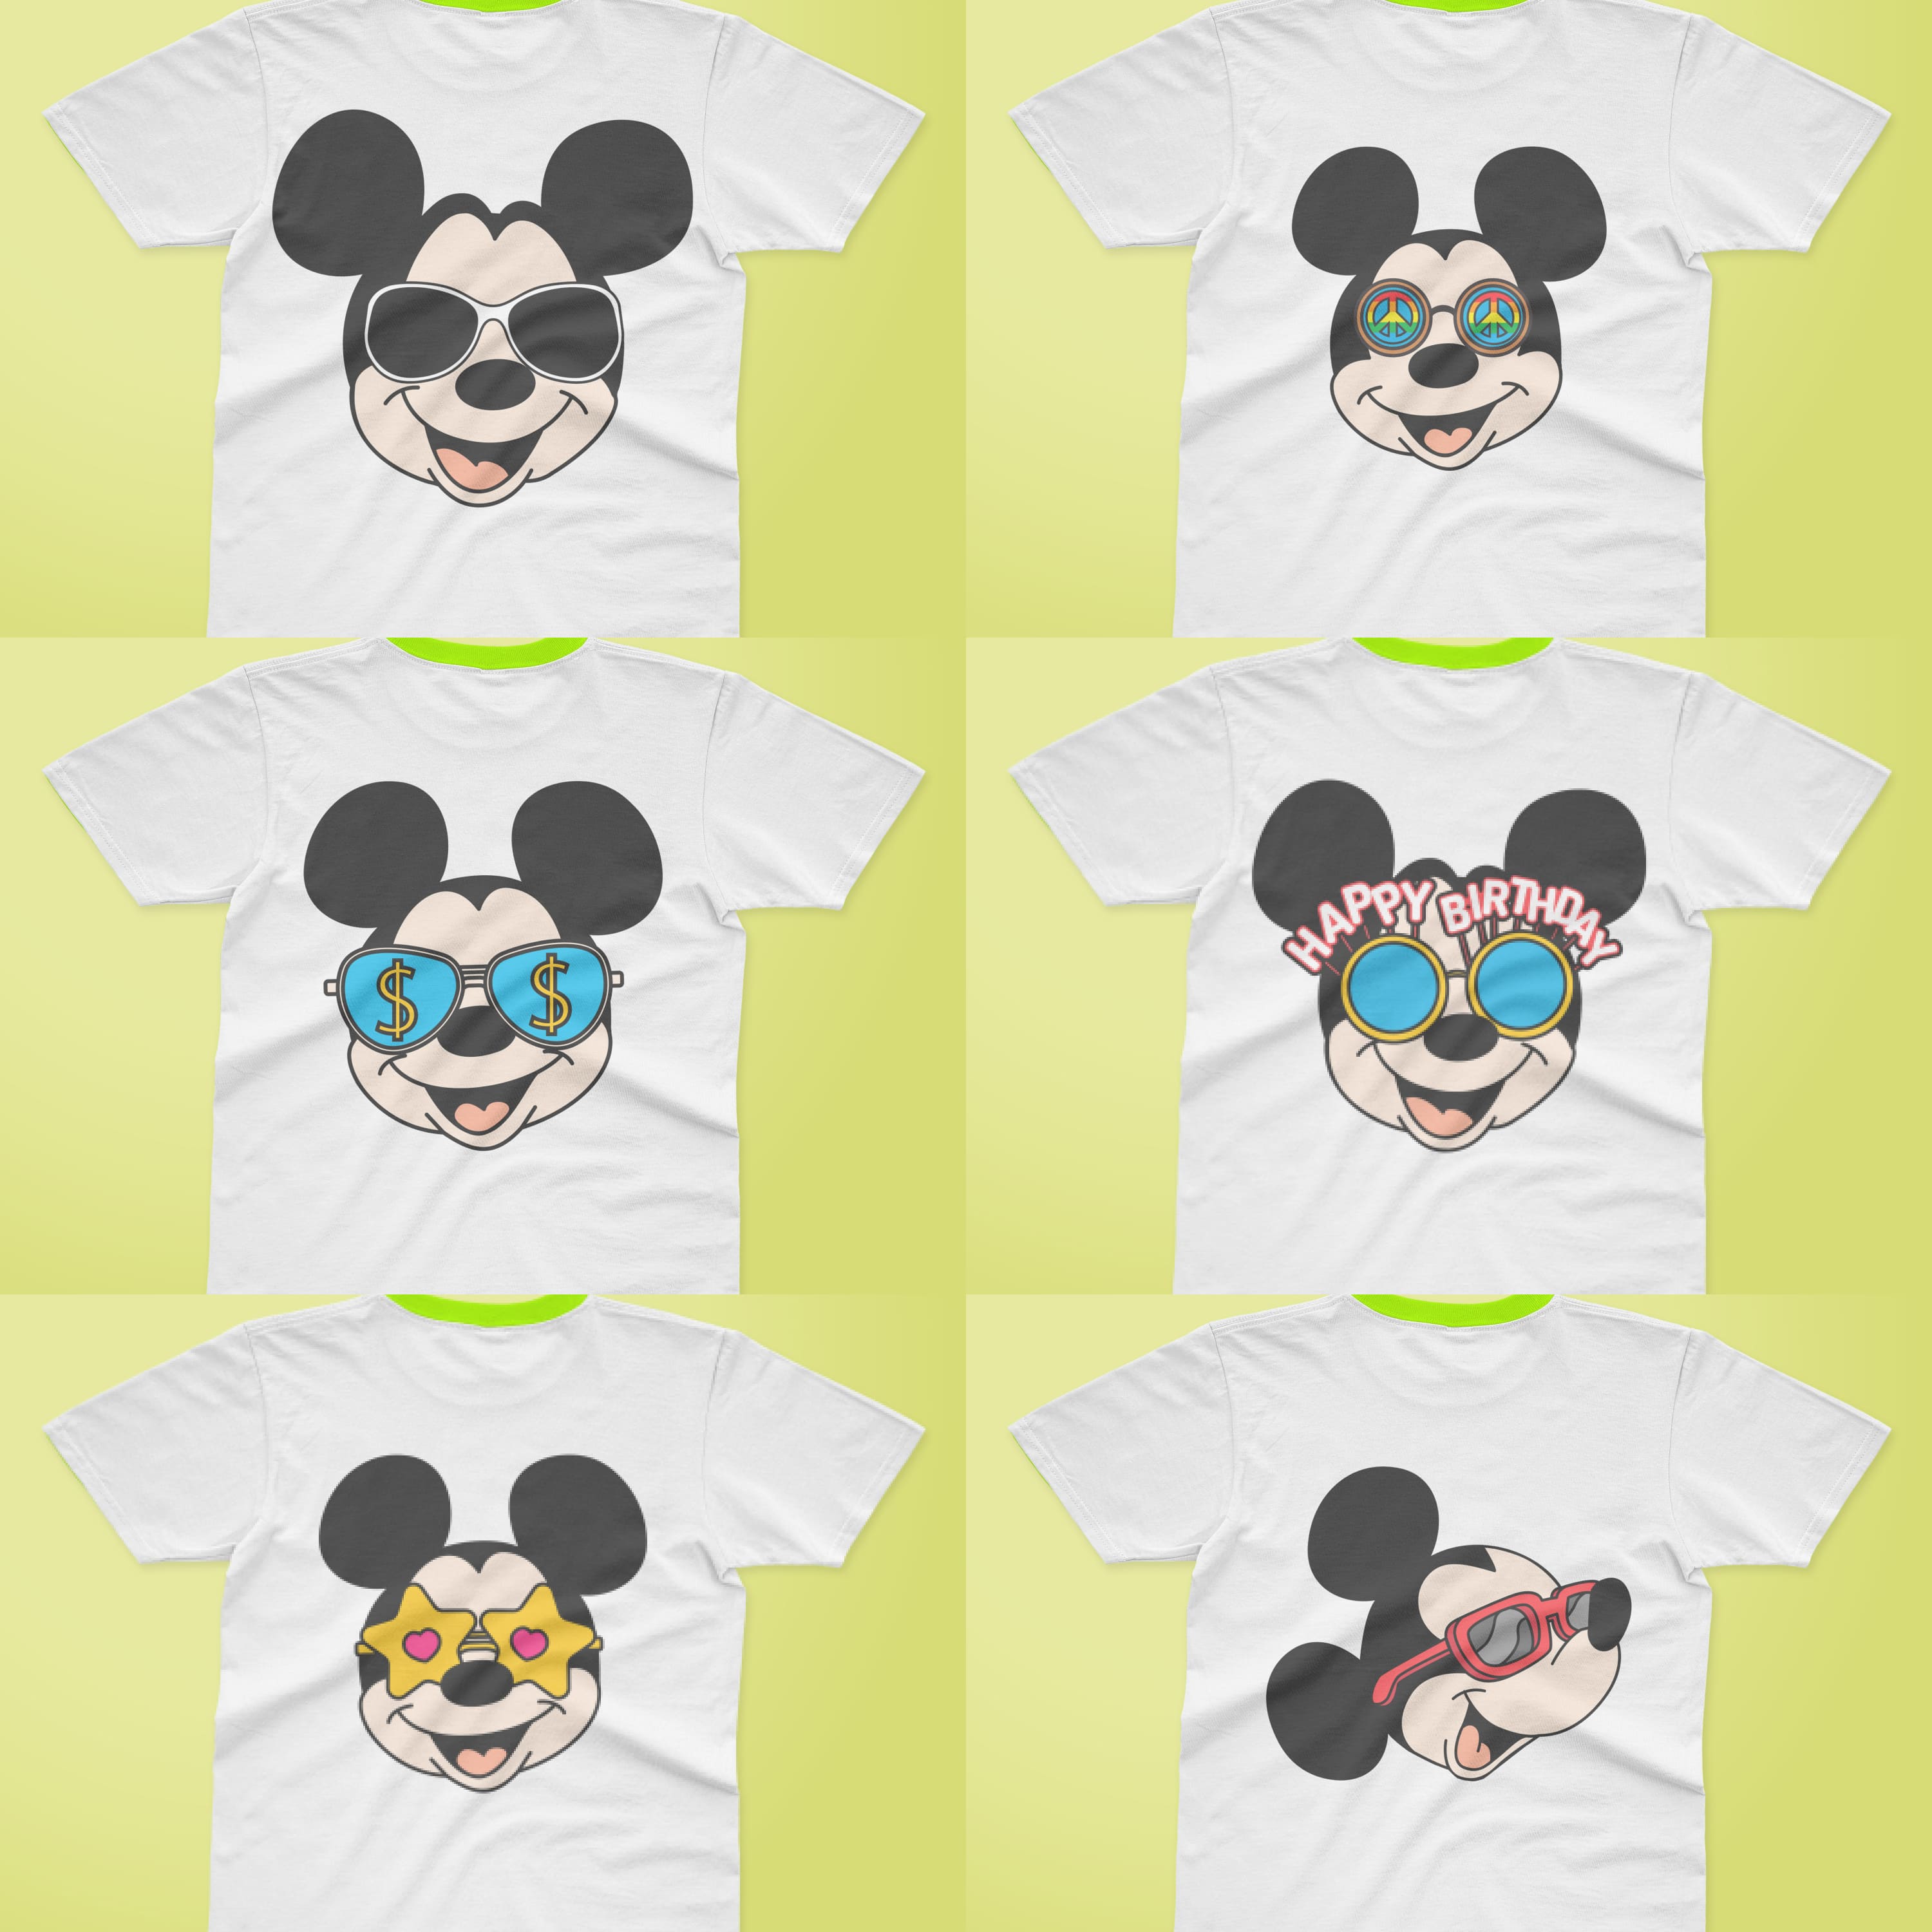 Mickey mouse with sunglasses created by DesignStudio.